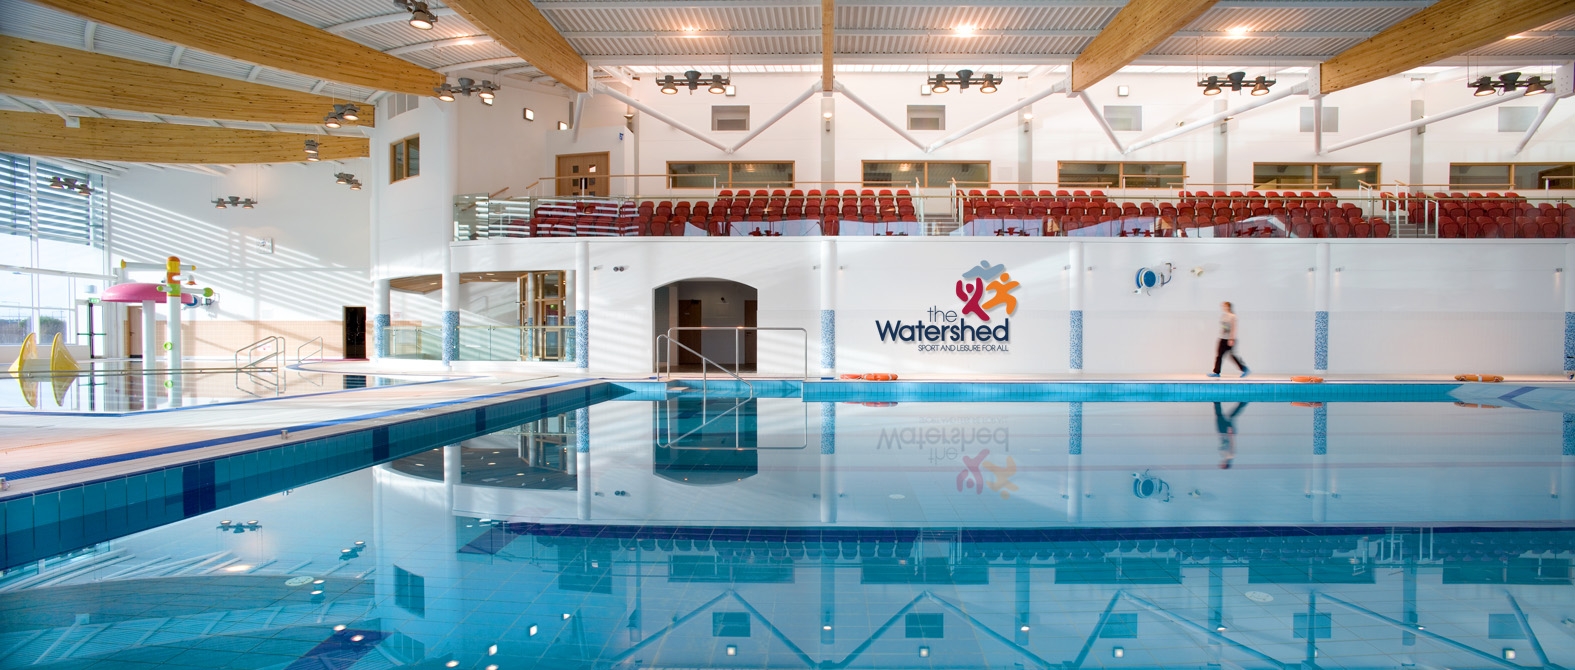 Pool With Watershed Logo (Threesixty)